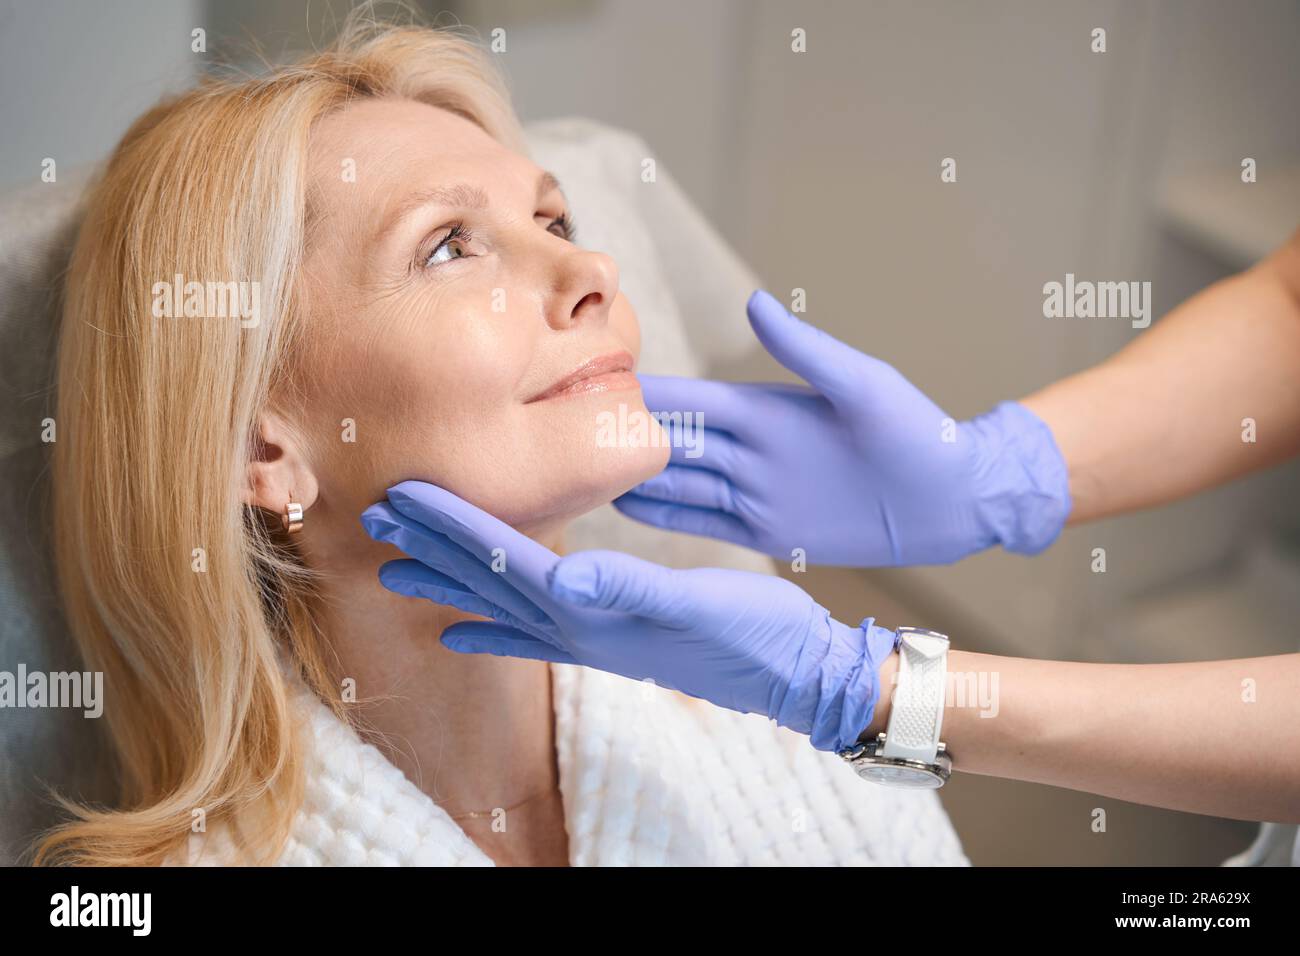 Hands in medical gloves touching happy woman face Stock Photo